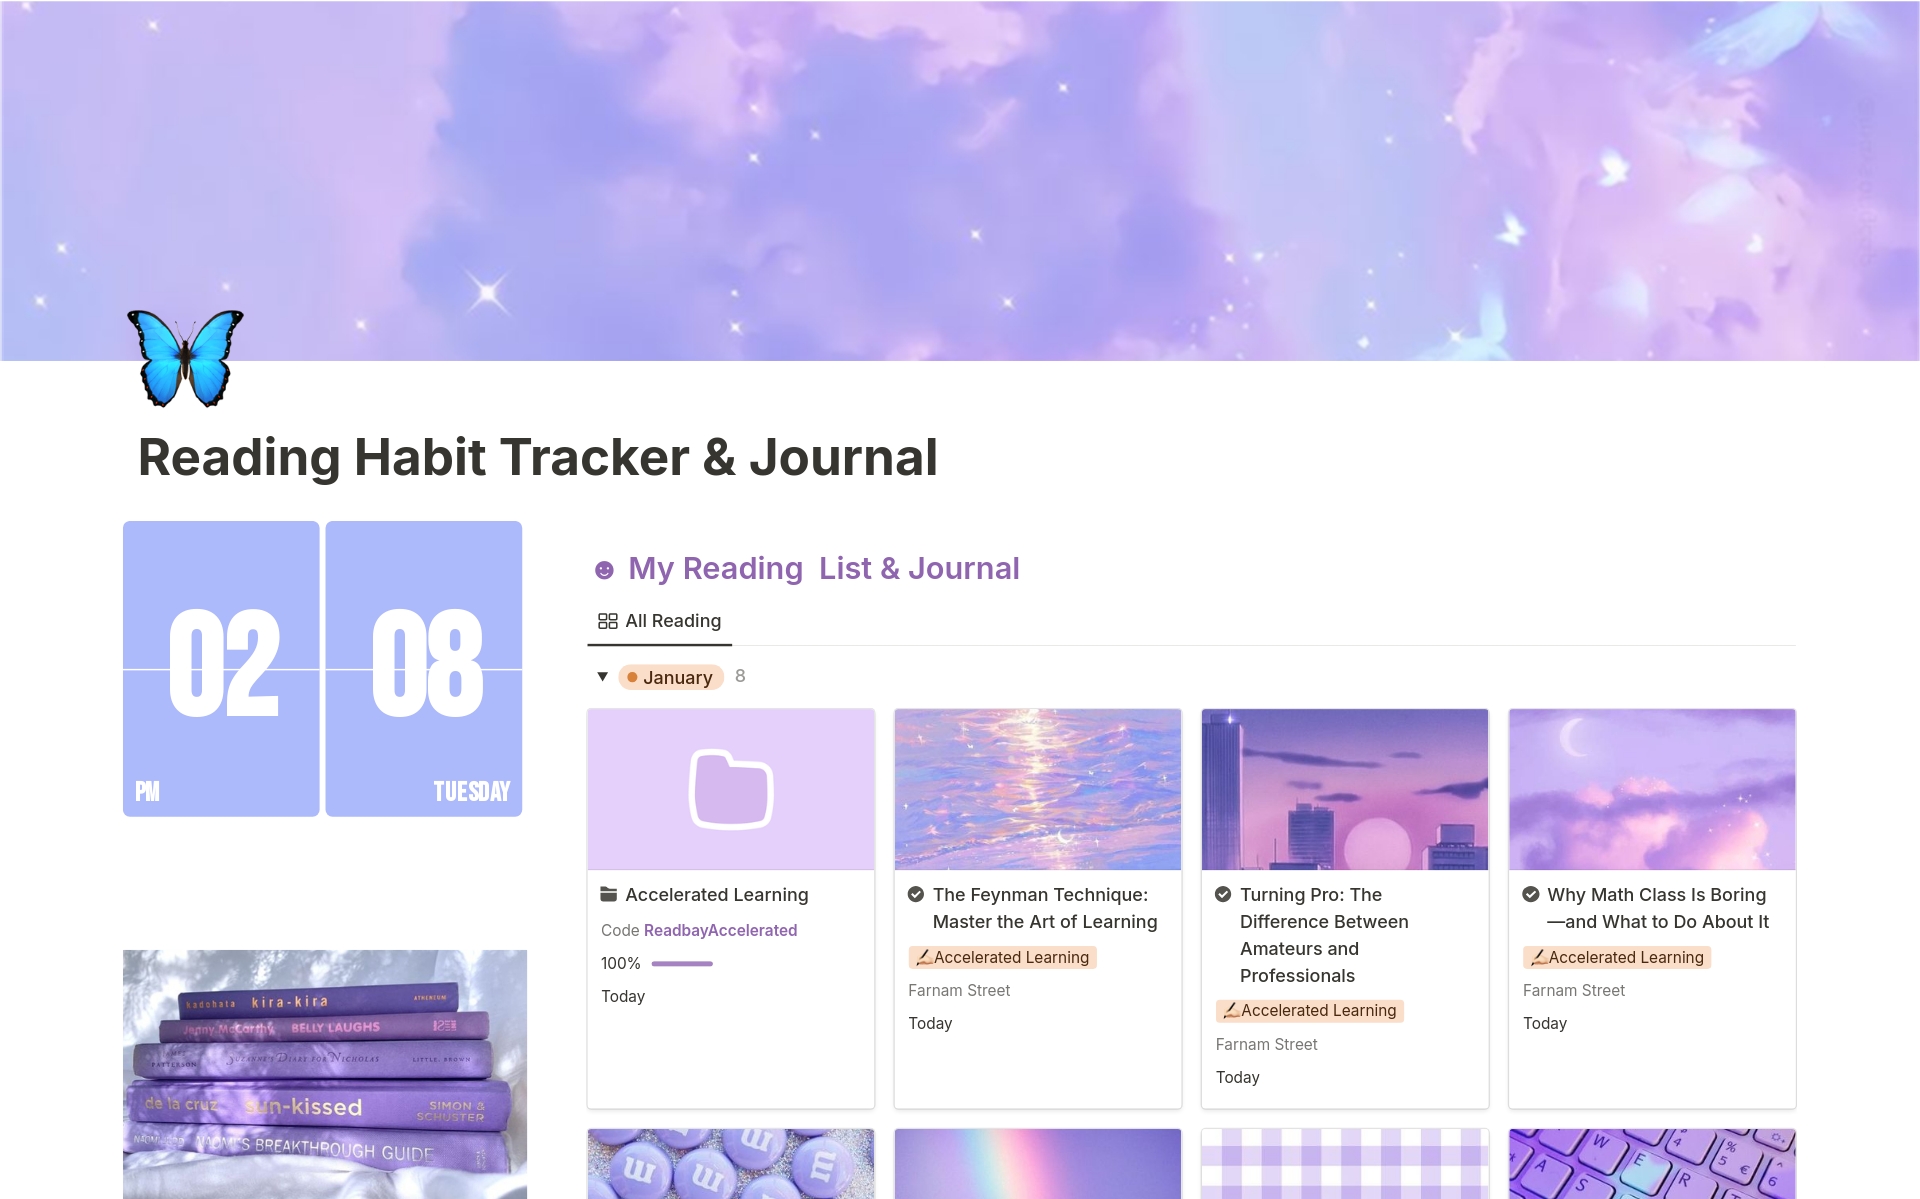 Embark on your growth journey with a dreamy purple-themed habit tracker & journal. Set your growth plan, start learning, and record your progress to make your dreams a reality.